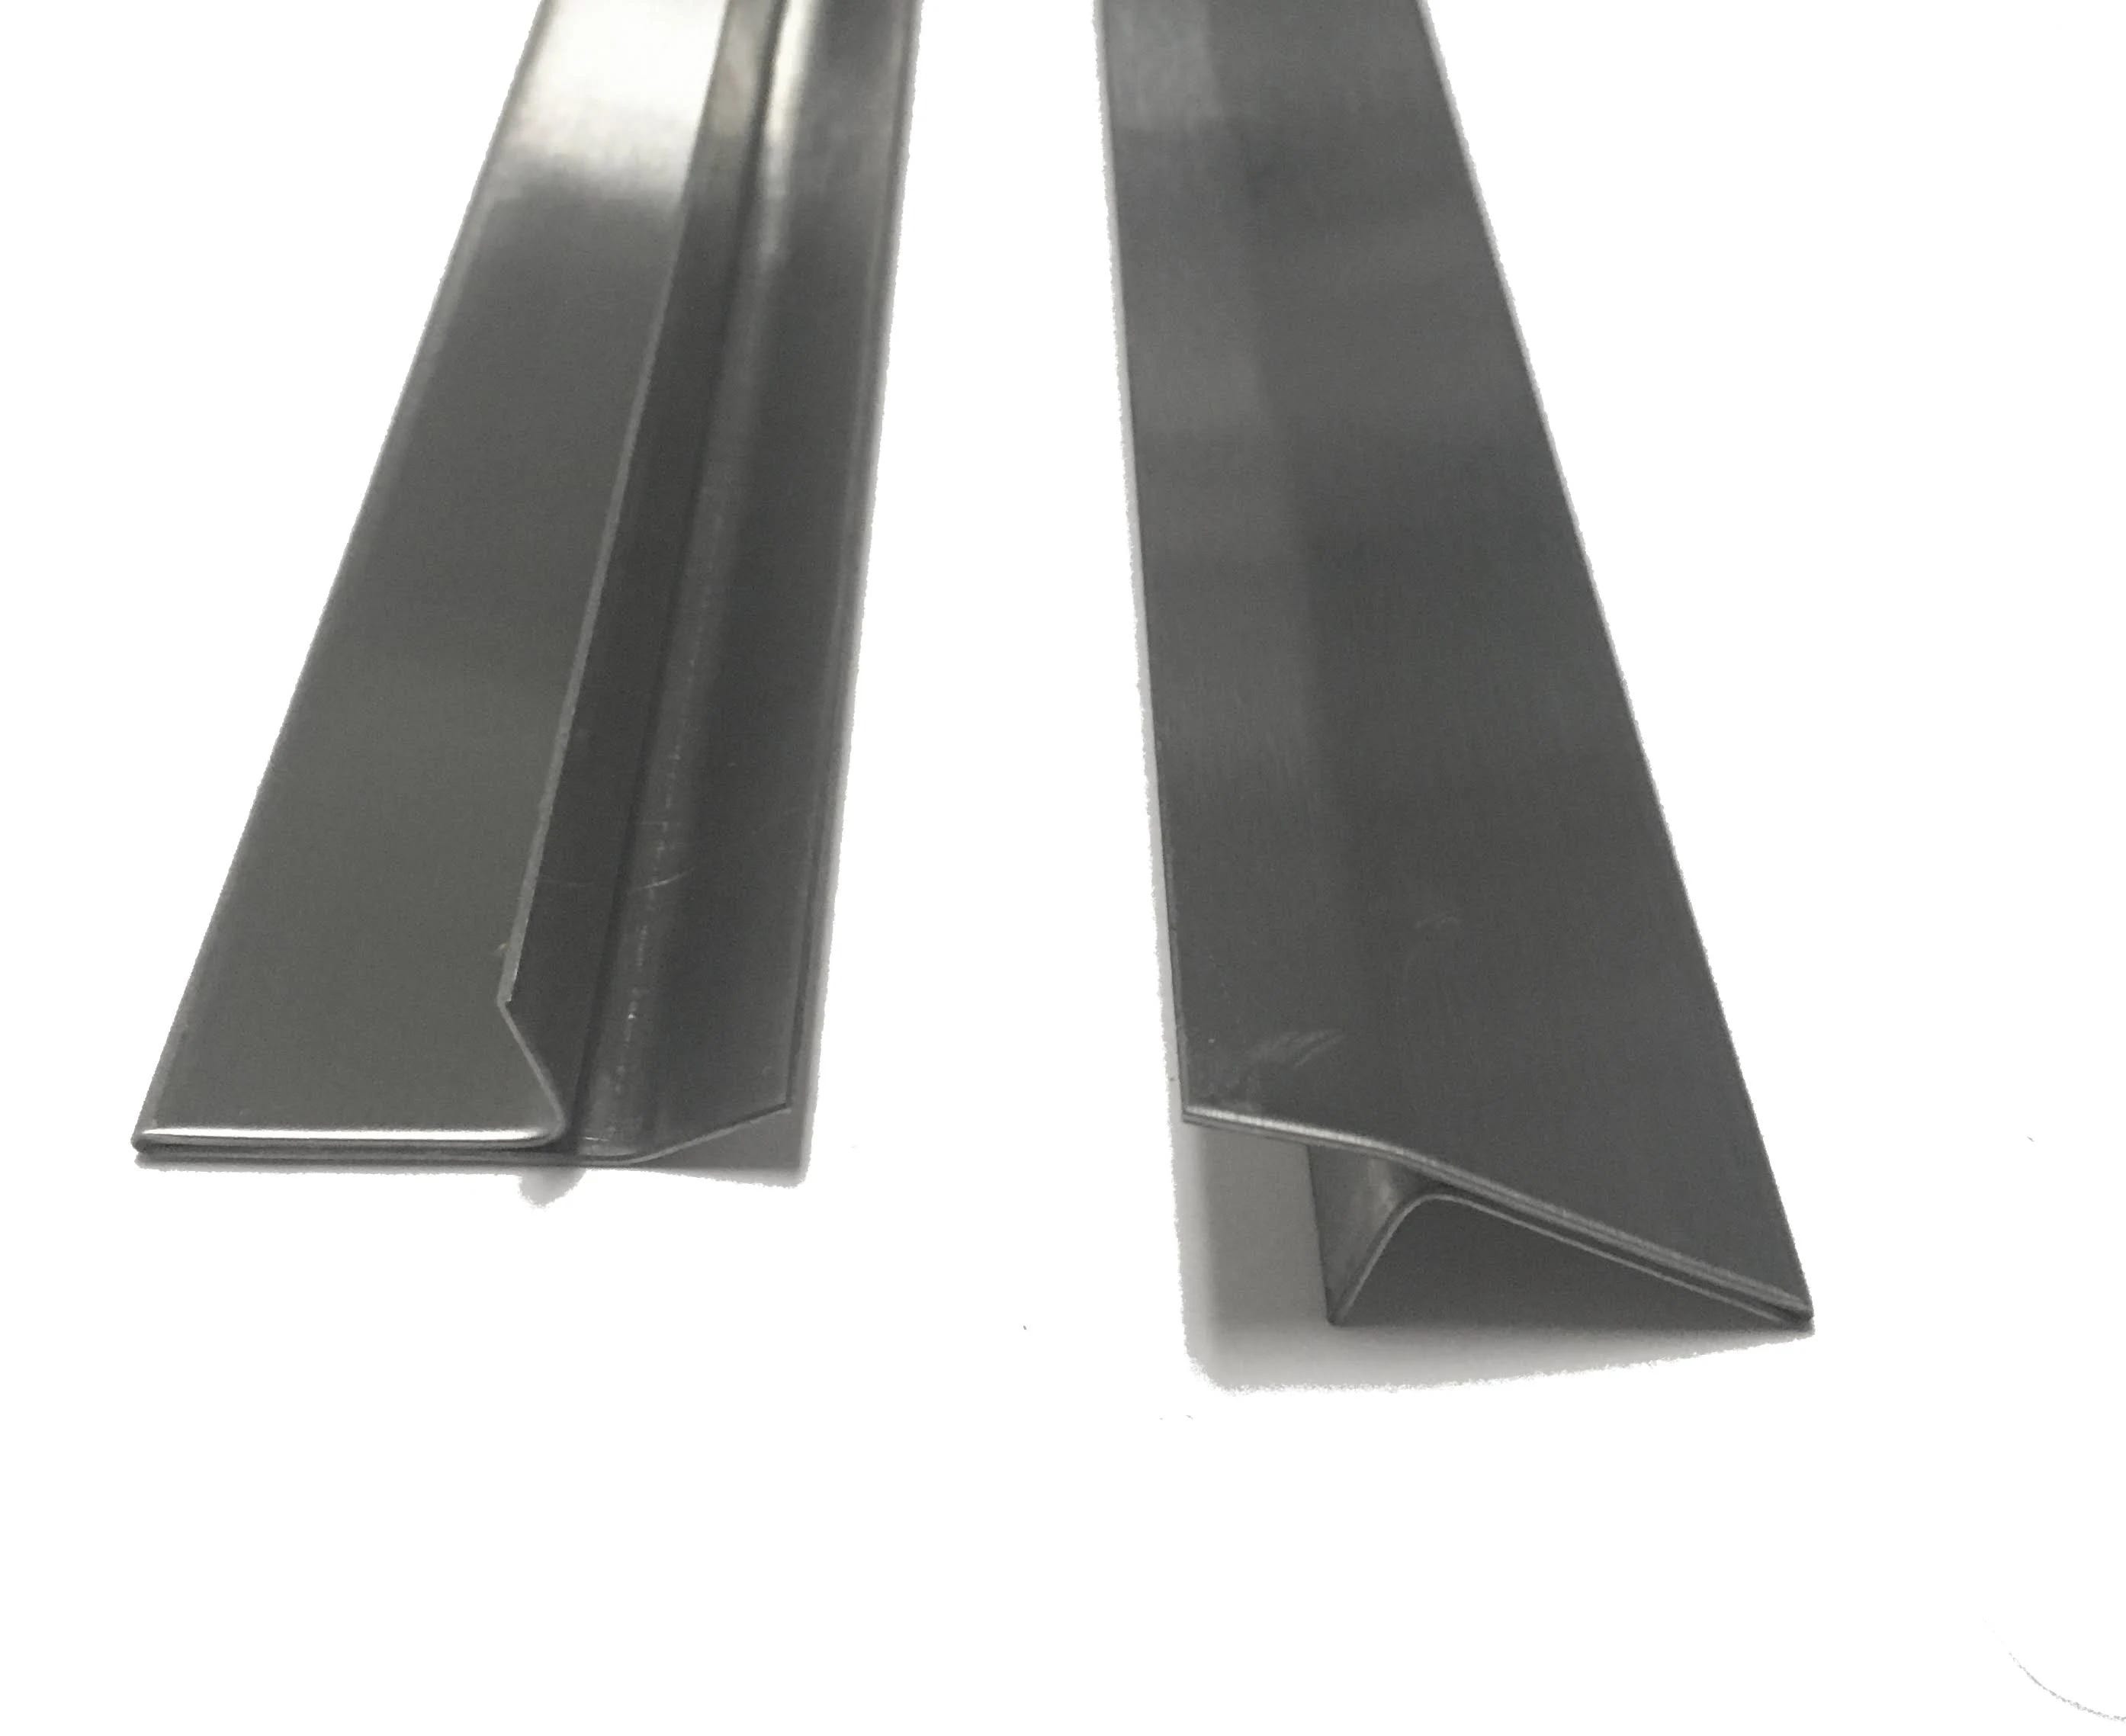 Modern Stainless Steel Stove Gap Cover for Seamless Countertops | Image